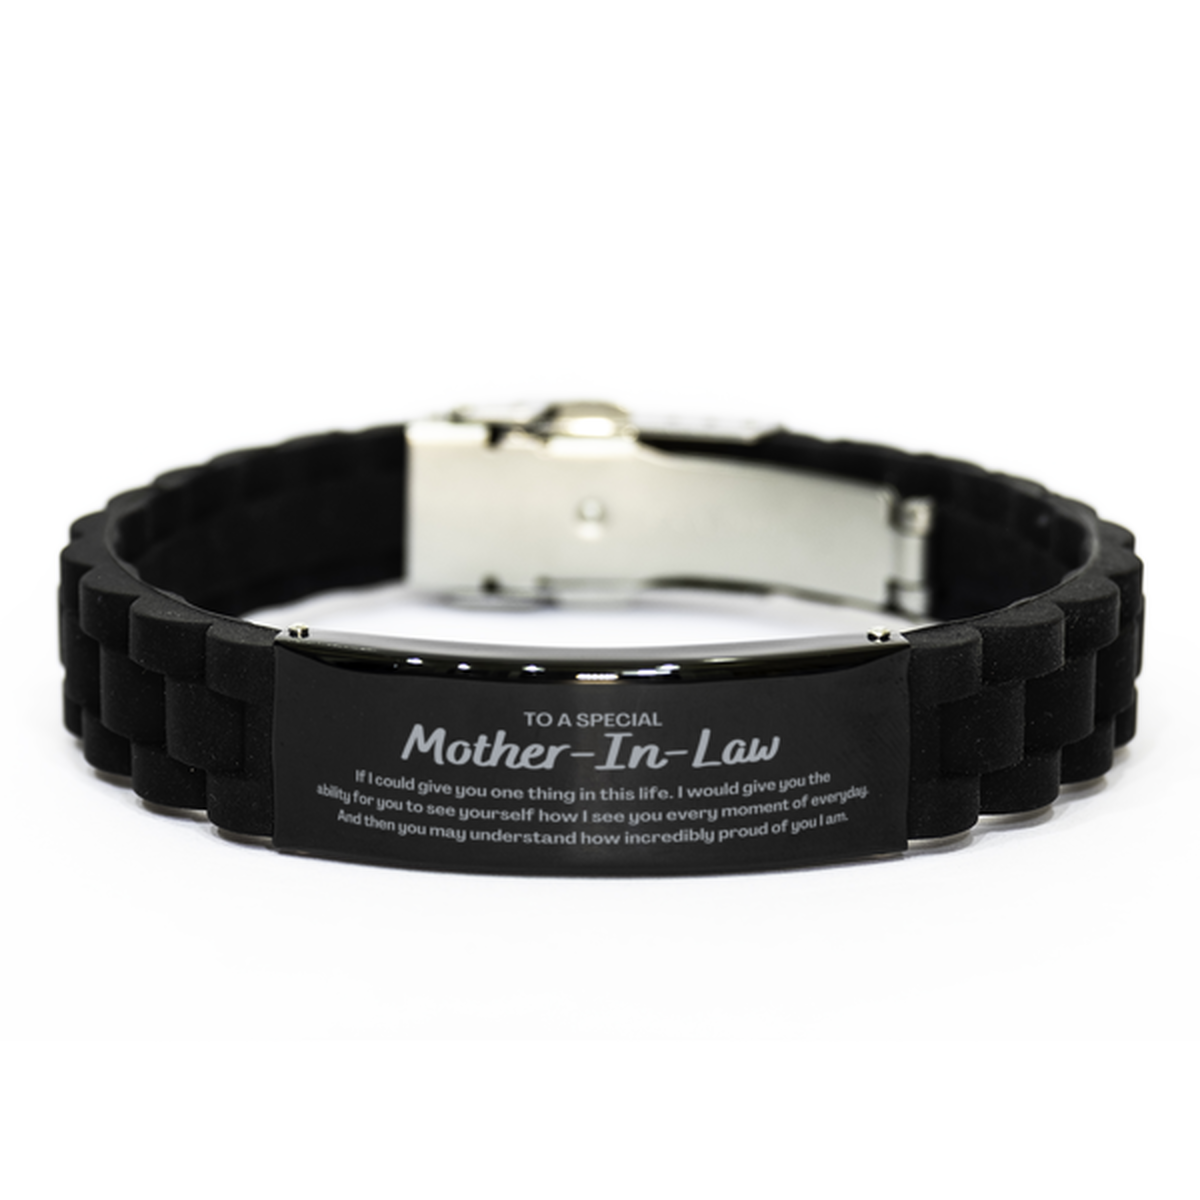 To My Mother-In-Law Black Glidelock Clasp Bracelet, Gifts For Mother-In-Law Engraved, Inspirational Gifts for Christmas Birthday, Epic Gifts for Mother-In-Law To A Special Mother-In-Law how incredibly proud of you I am